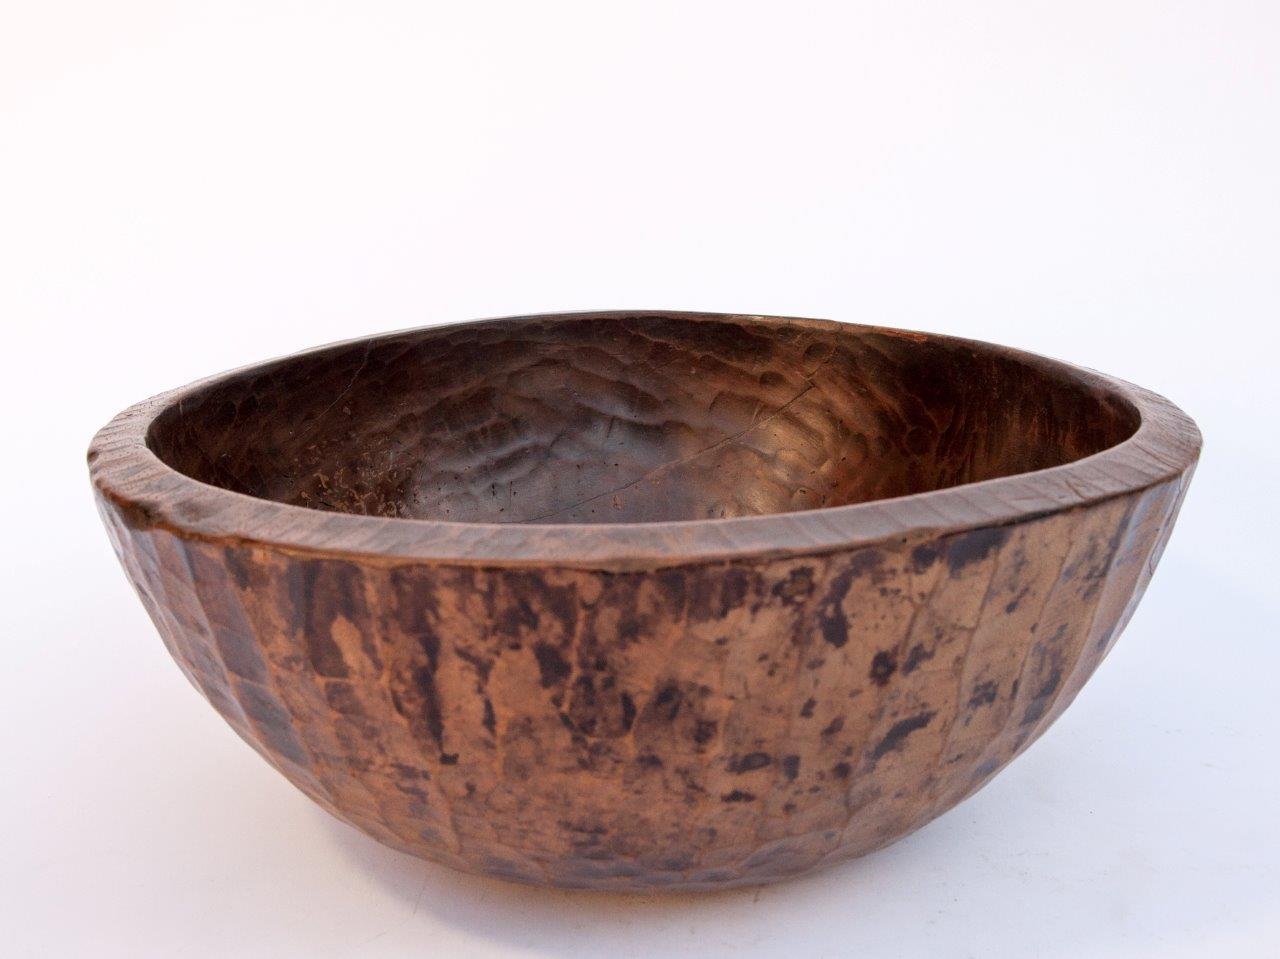 Old tribal wooden bowl from West Nepal Himal, 16 inch diameter mid-20th century.
This bowl is hand hewn from a single piece of local wood. Years of use in the rugged conditions of a west Nepal household have lent it a rich patina, and the hand